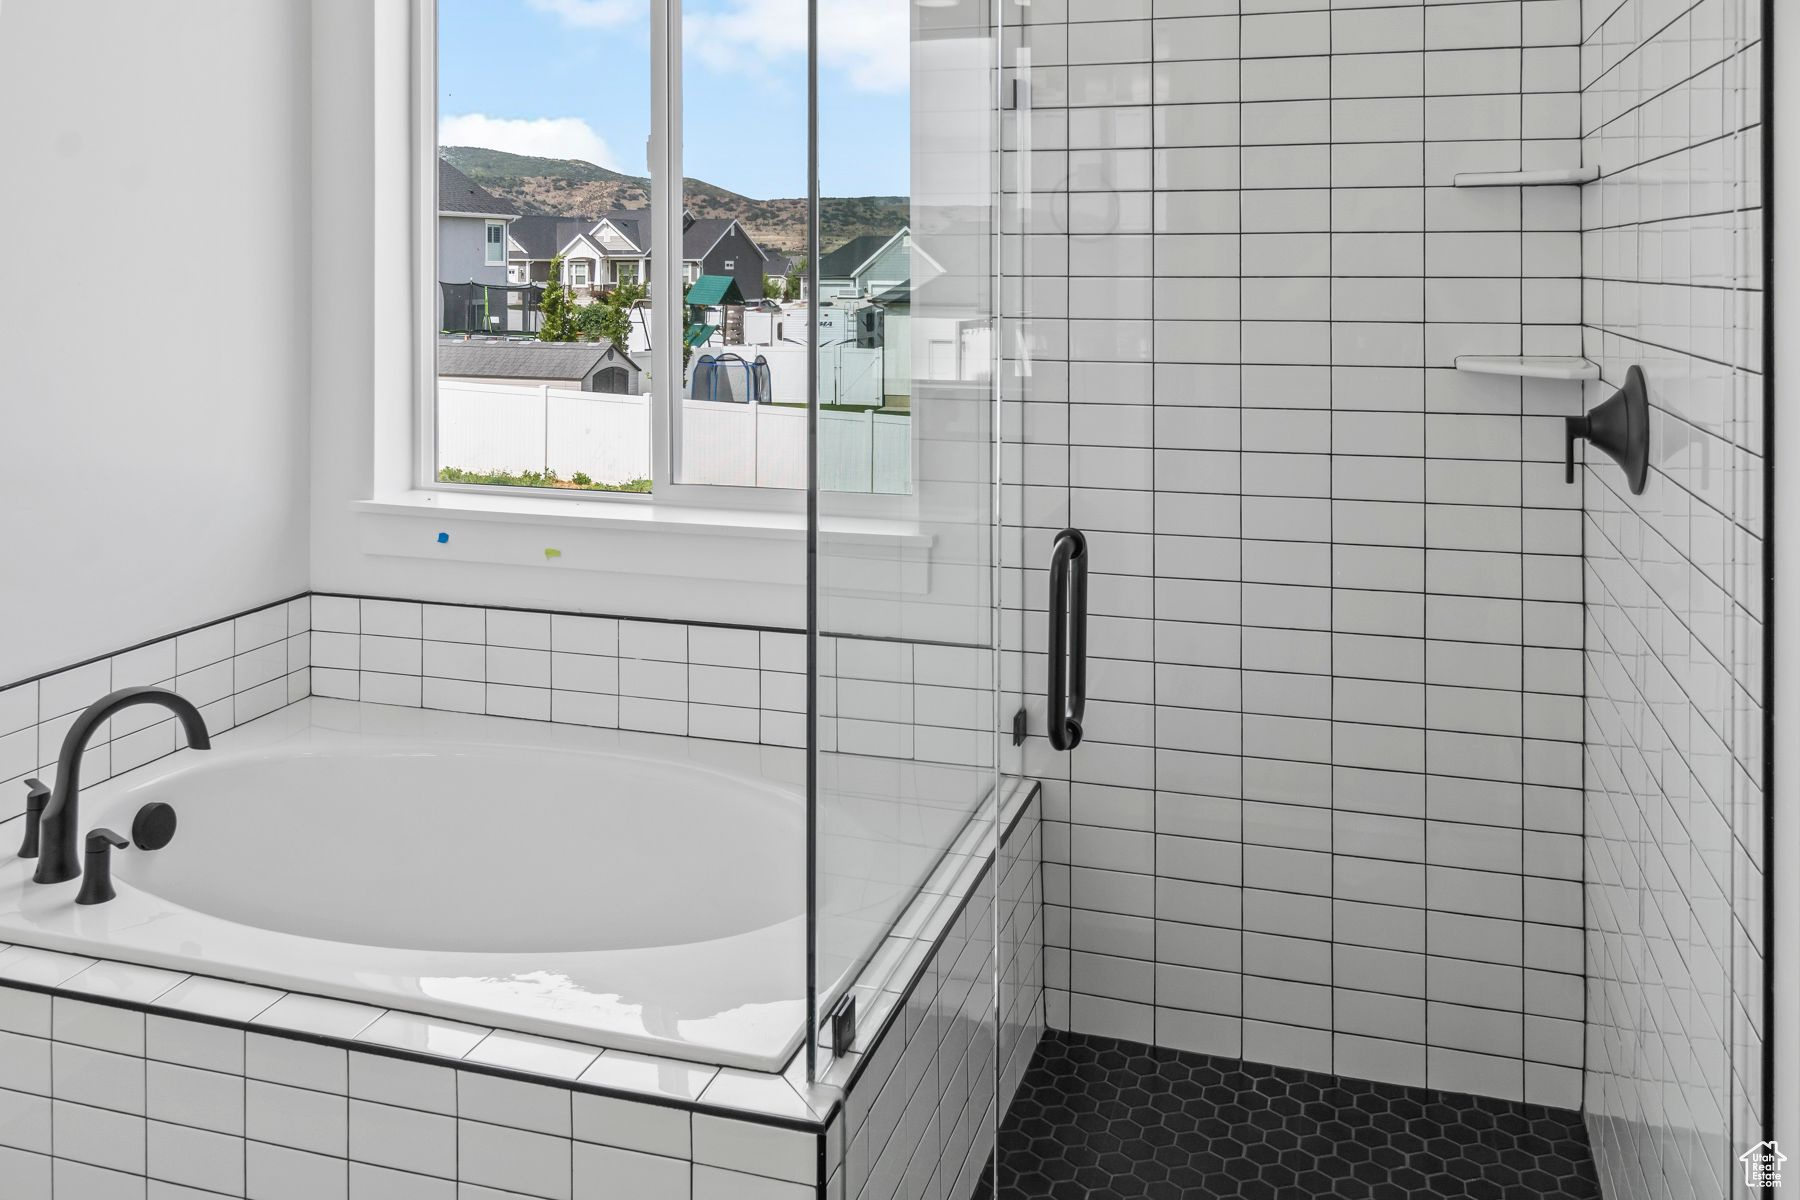 Bathroom featuring a relaxing tiled bath and tile floors